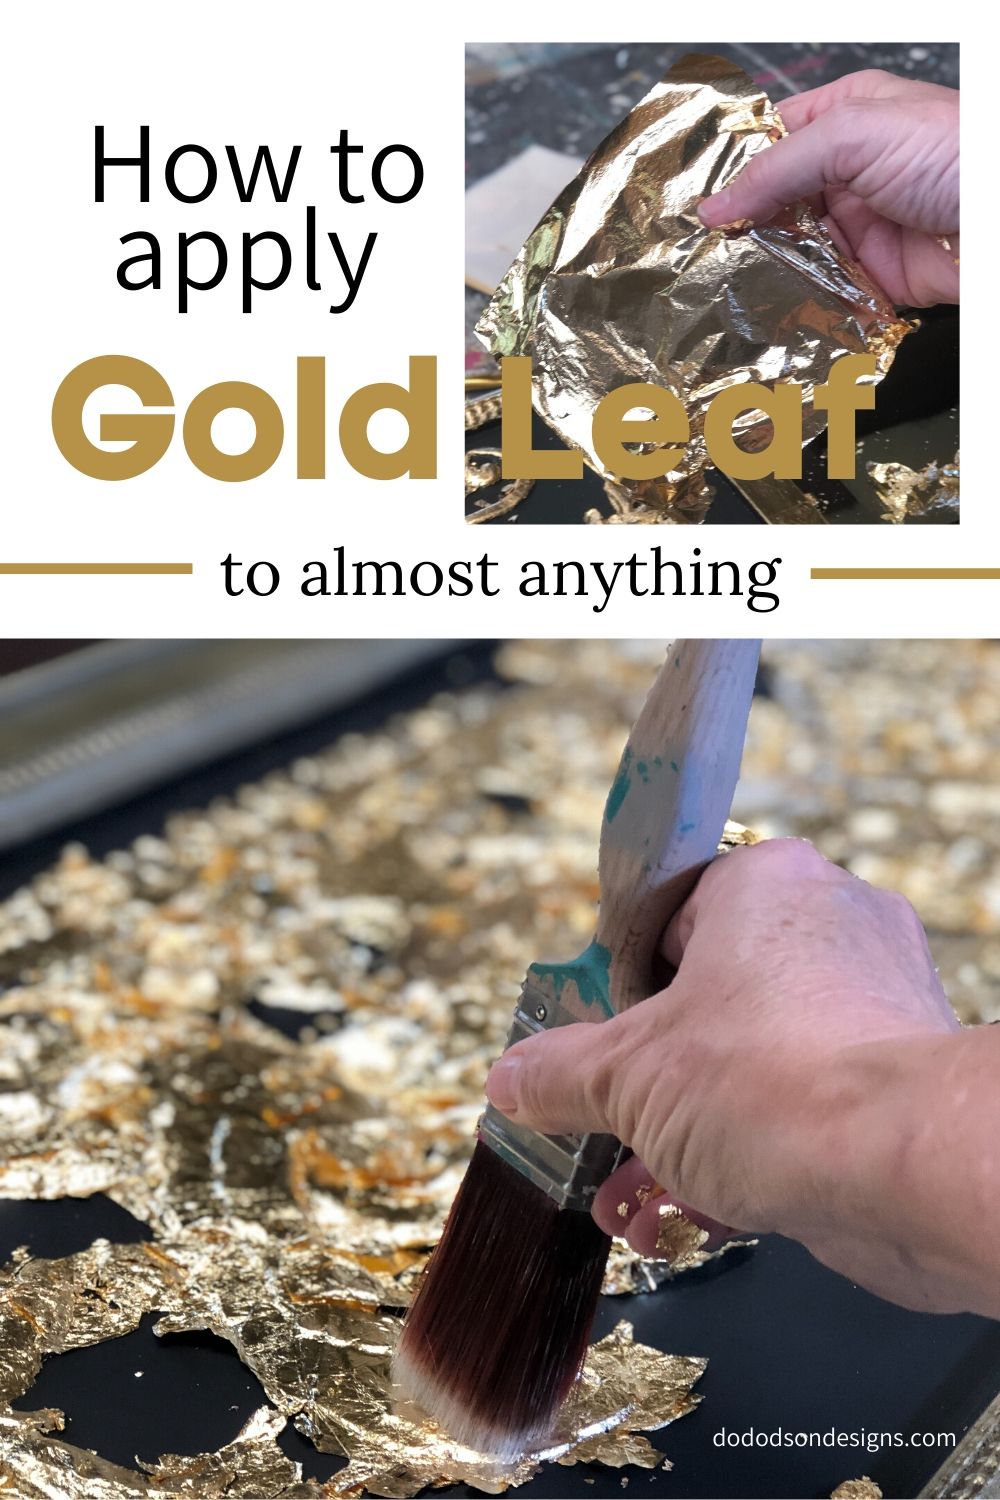 How To Apply Gold Leaf To Almost Anything Do Dodson Designs Gold Leaf